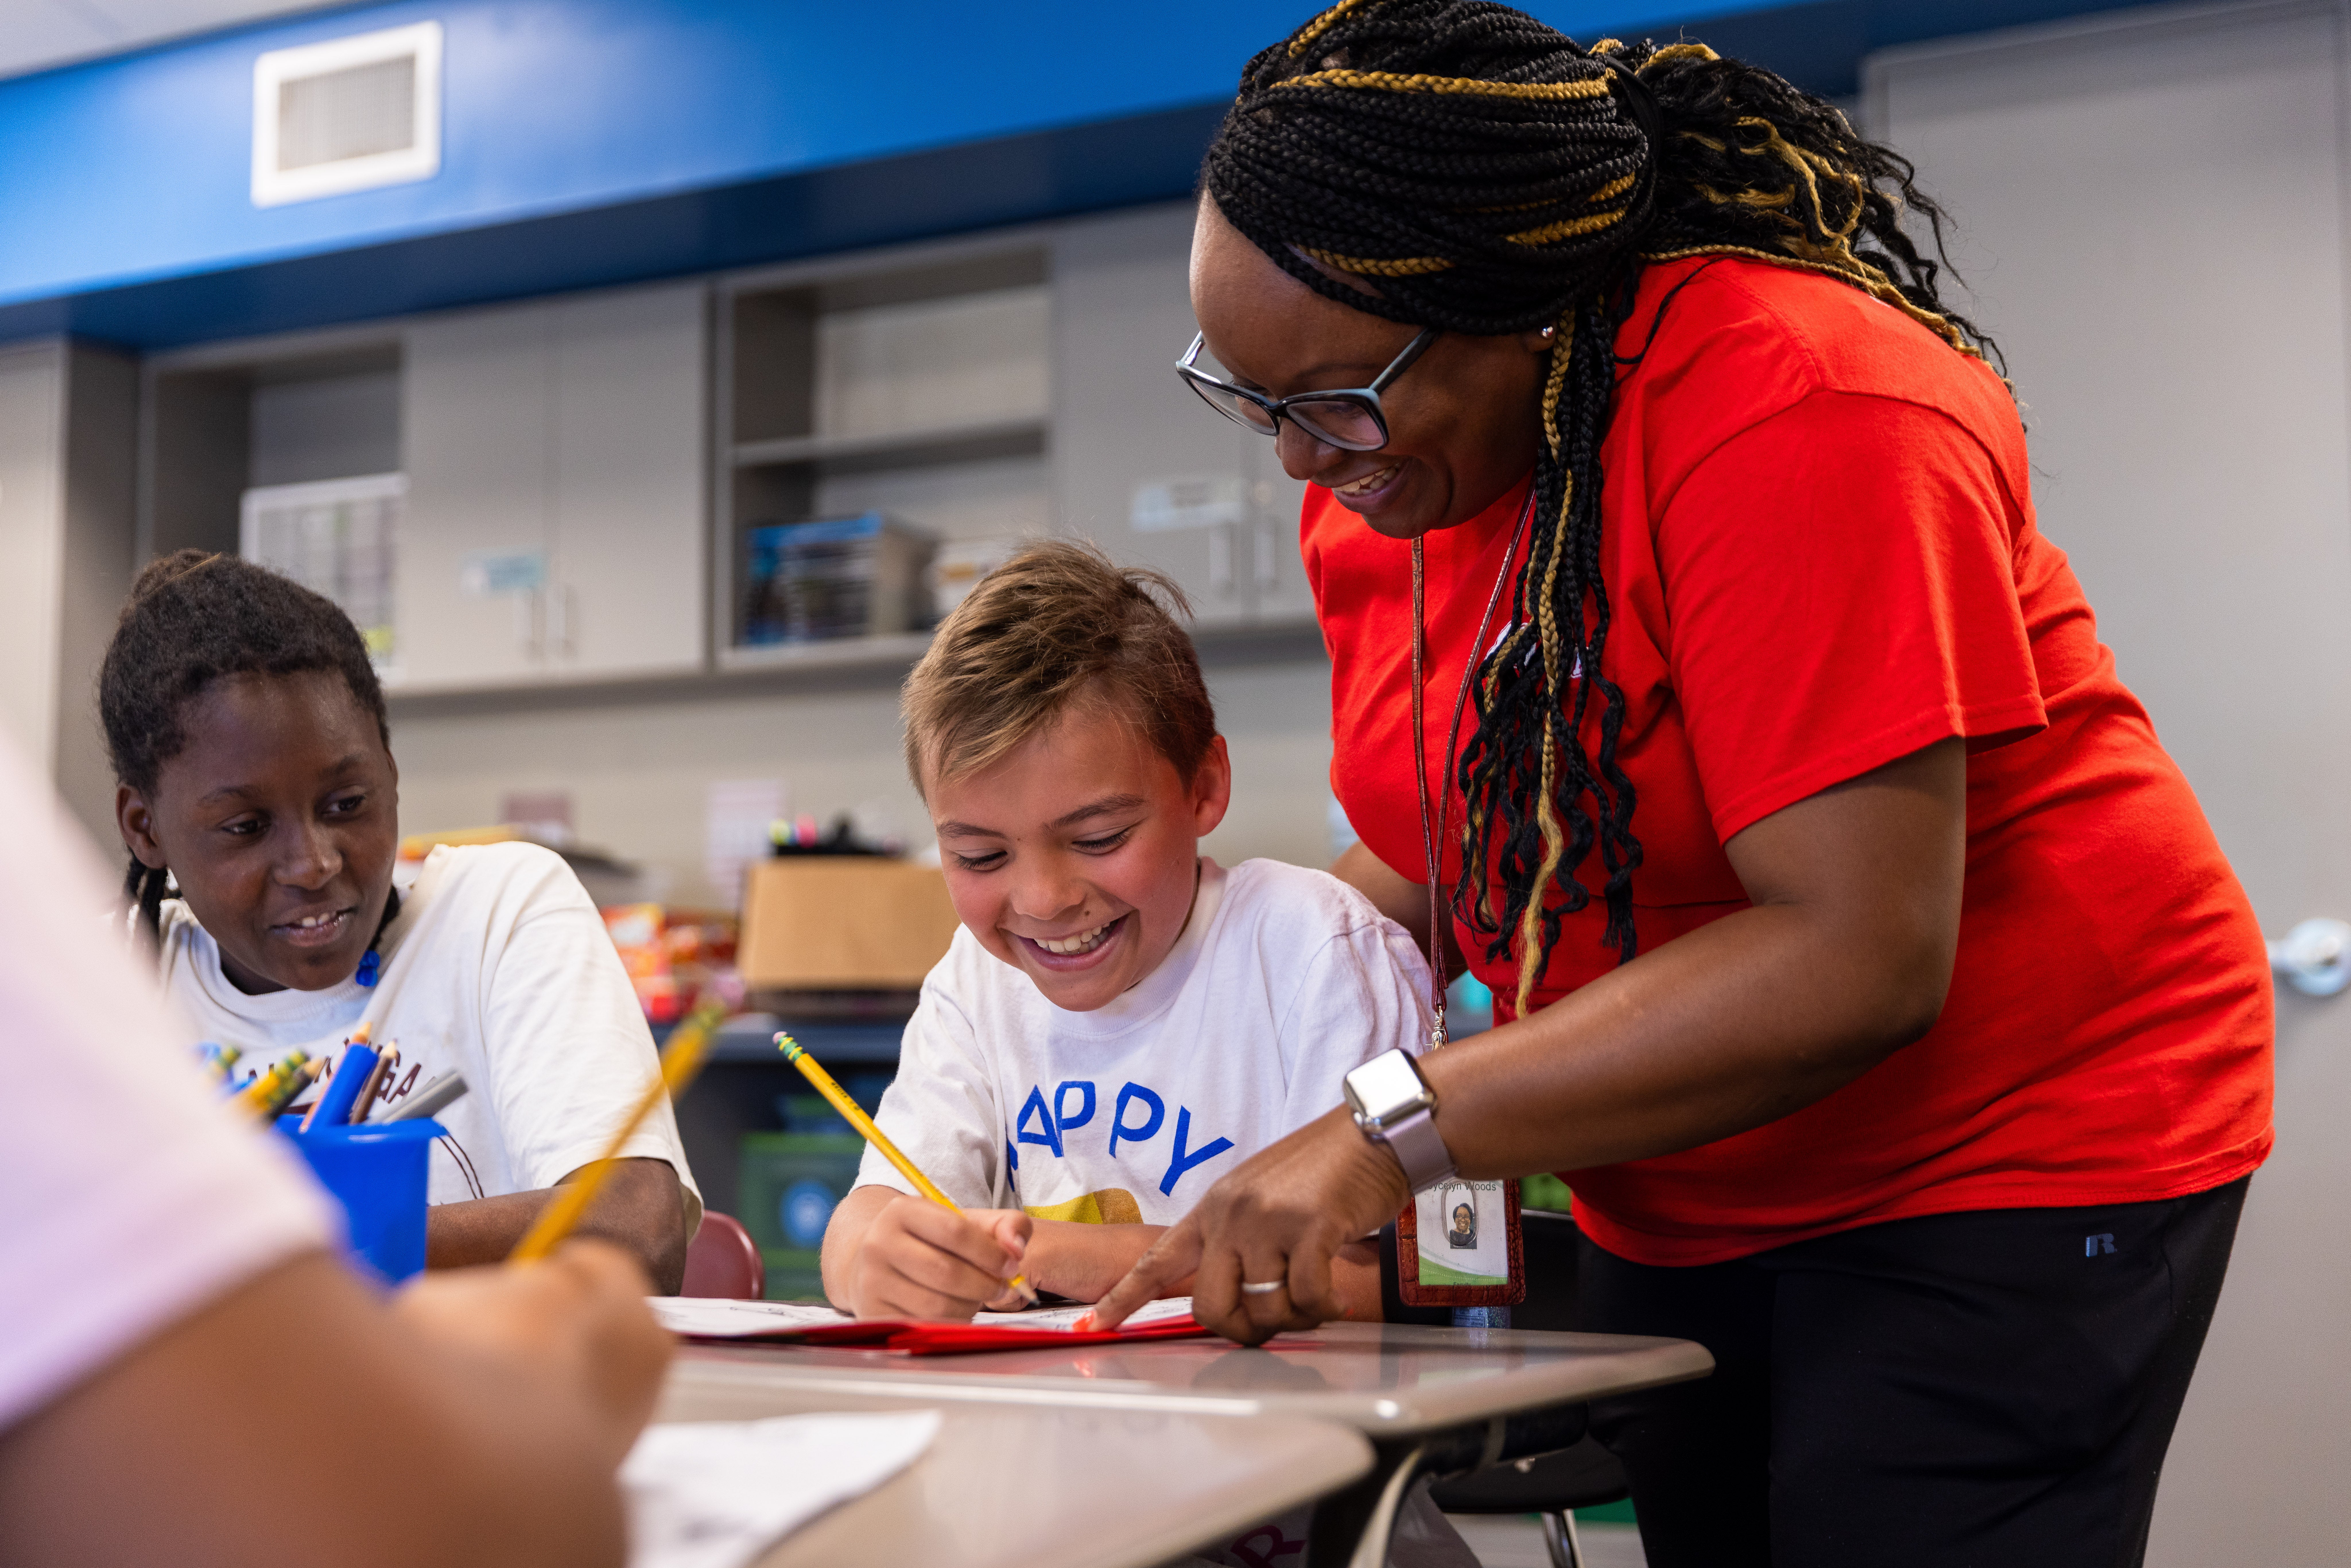 A teacher guides two students in their summer program work.